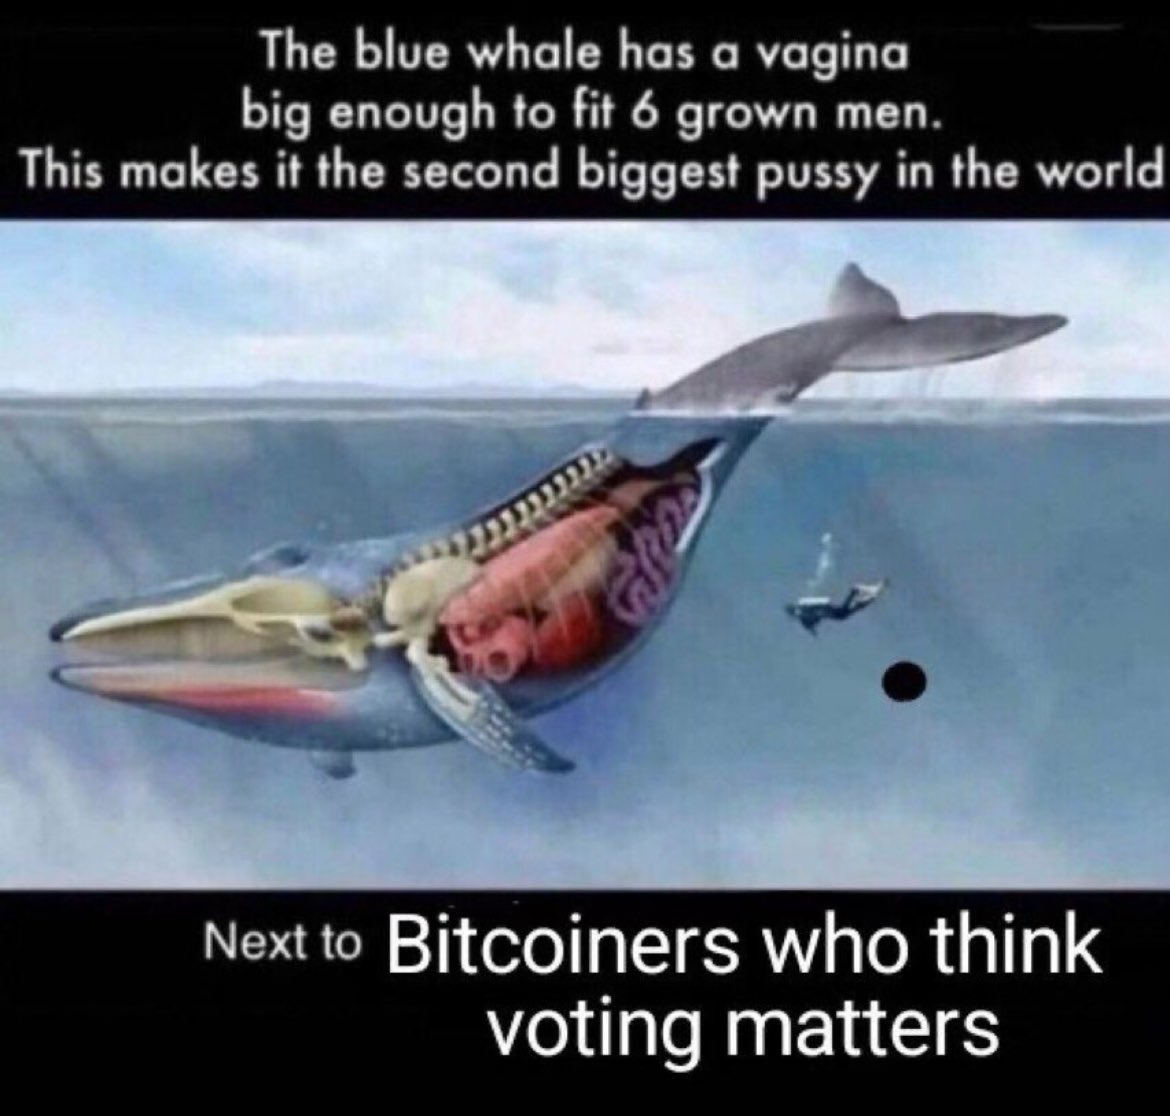 The blue whale has a vagina
big enough to fit 6 grown men.
This makes it the second biggest pussy in the world
Next to Bitcoiners who think
voting matter